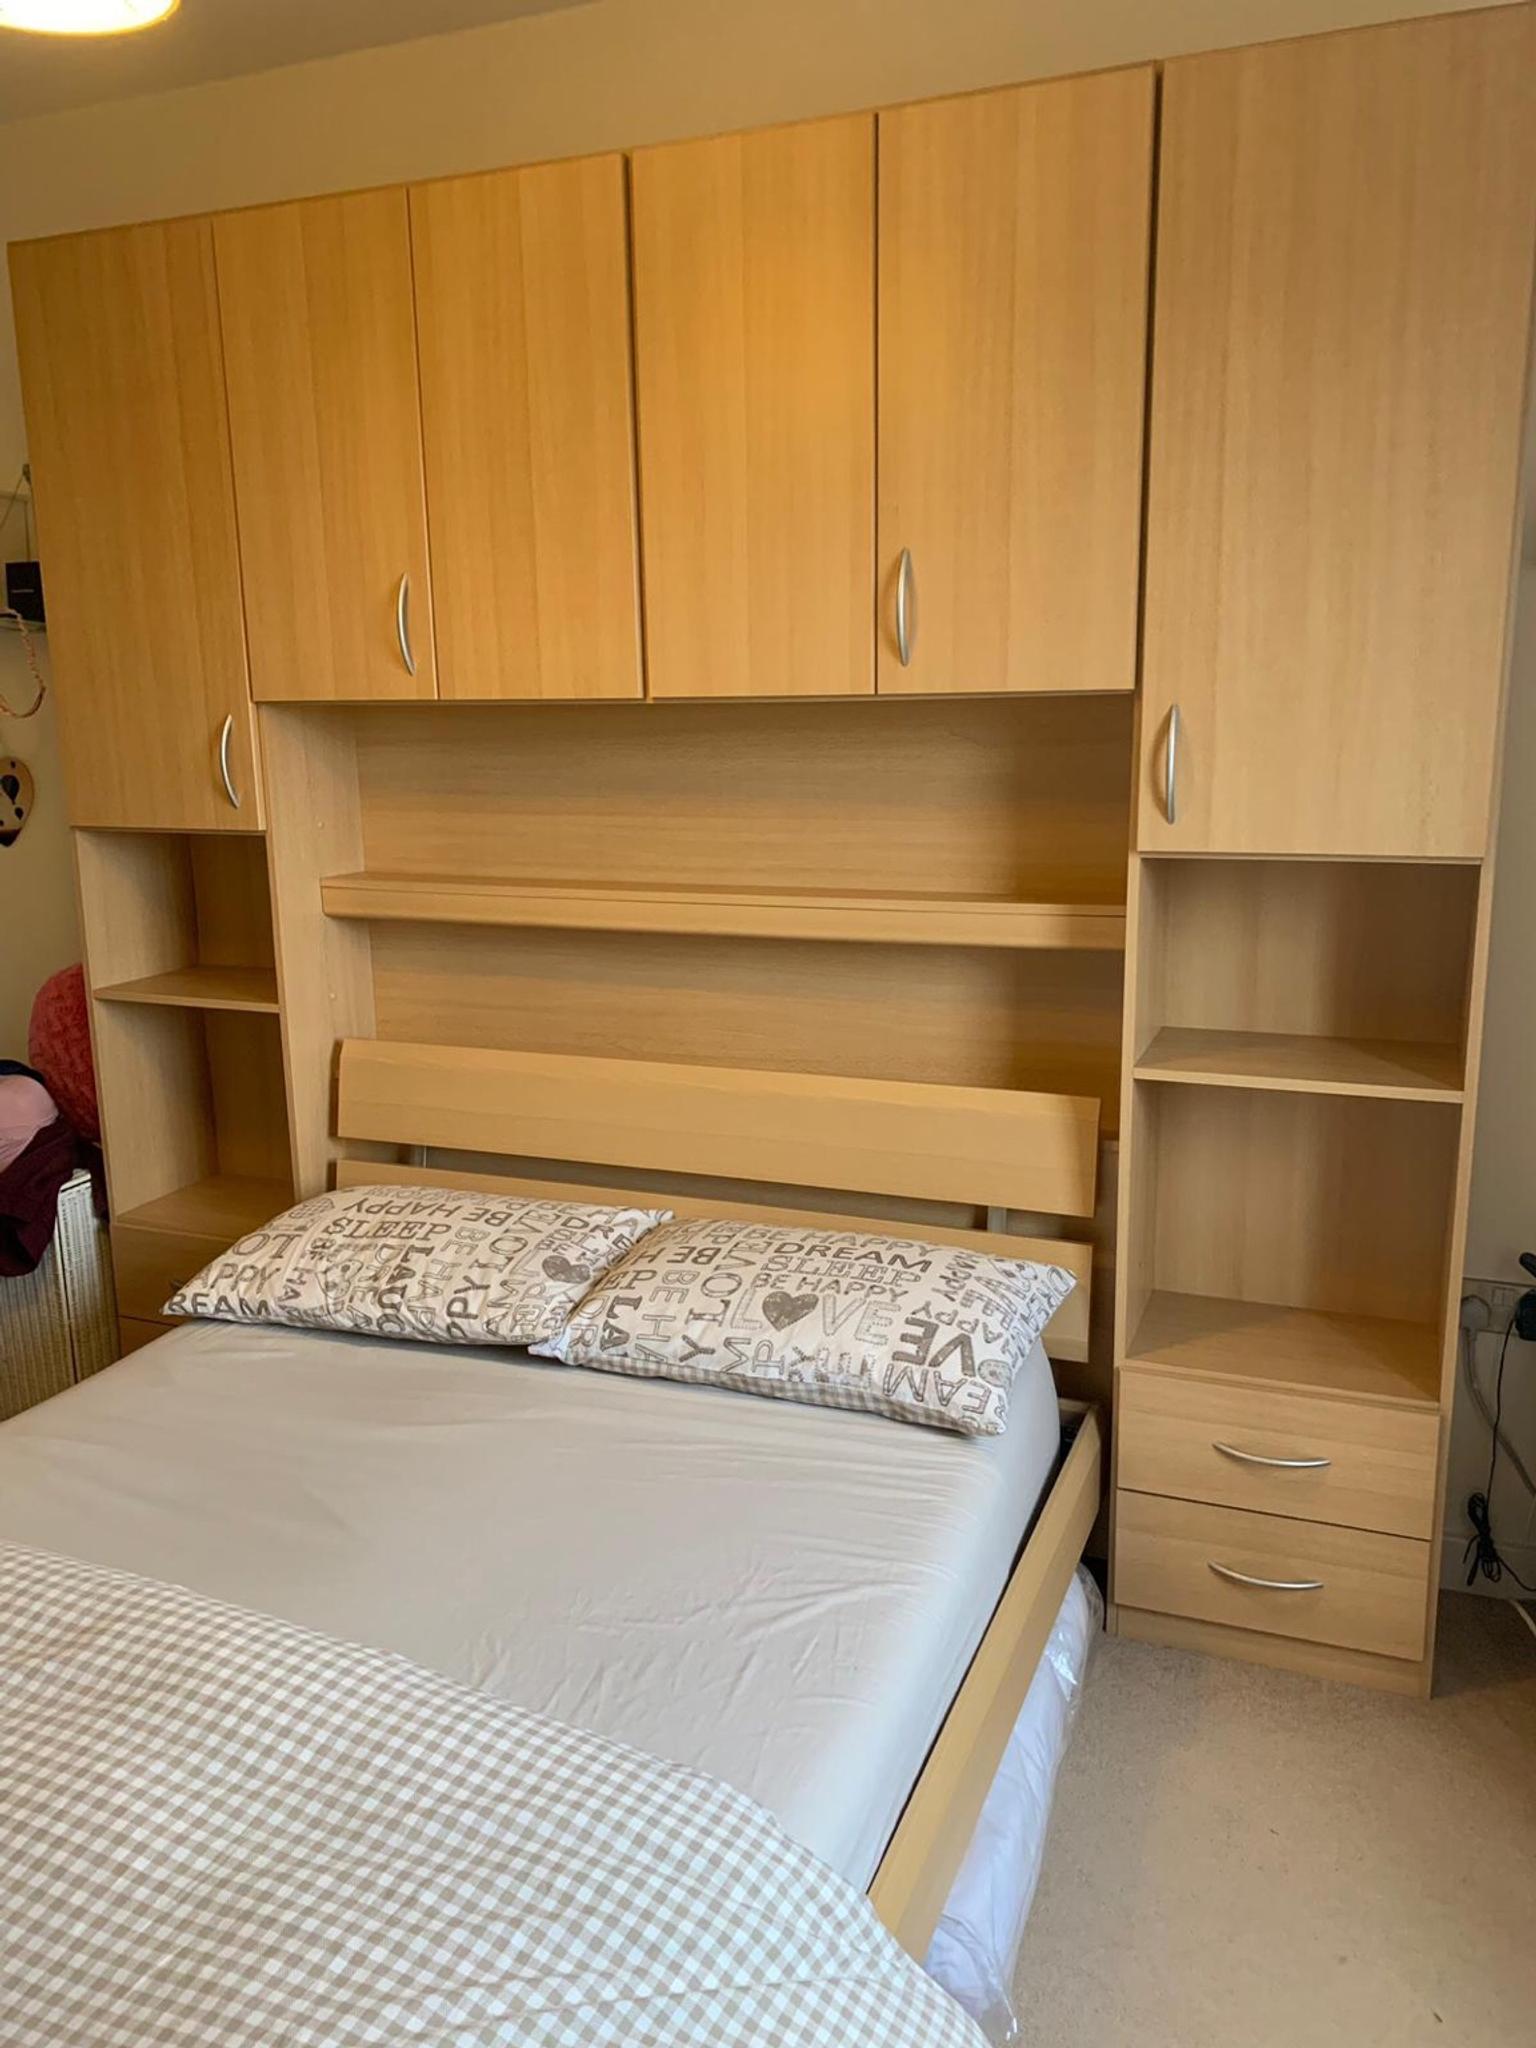 Overhead Storage Unit Double Bed In Se18 London For 75 00 For